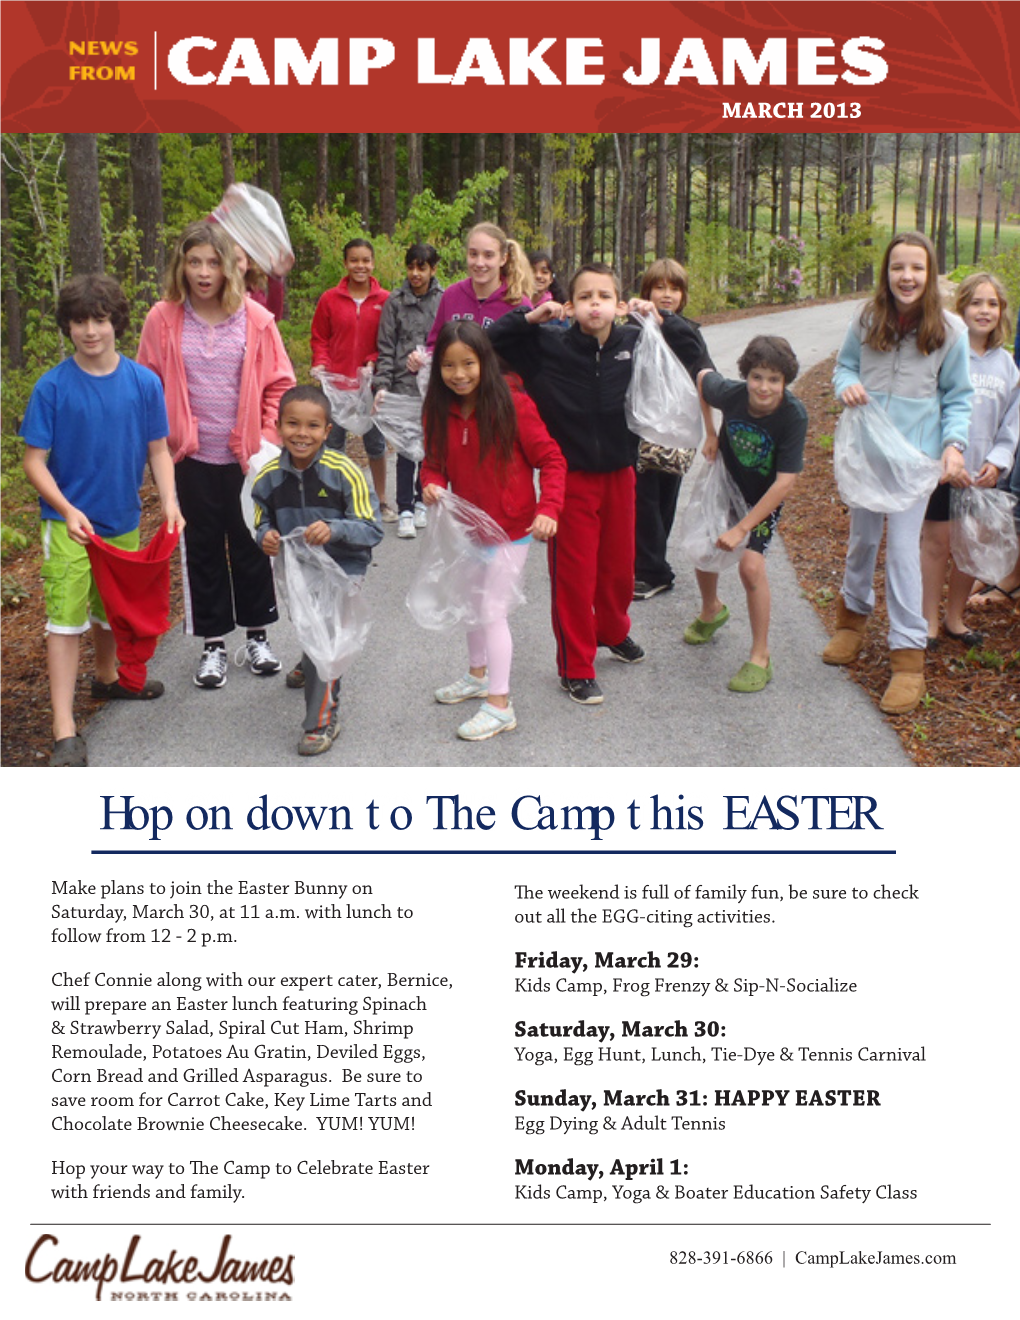 Hop on Down to the Camp This EASTER